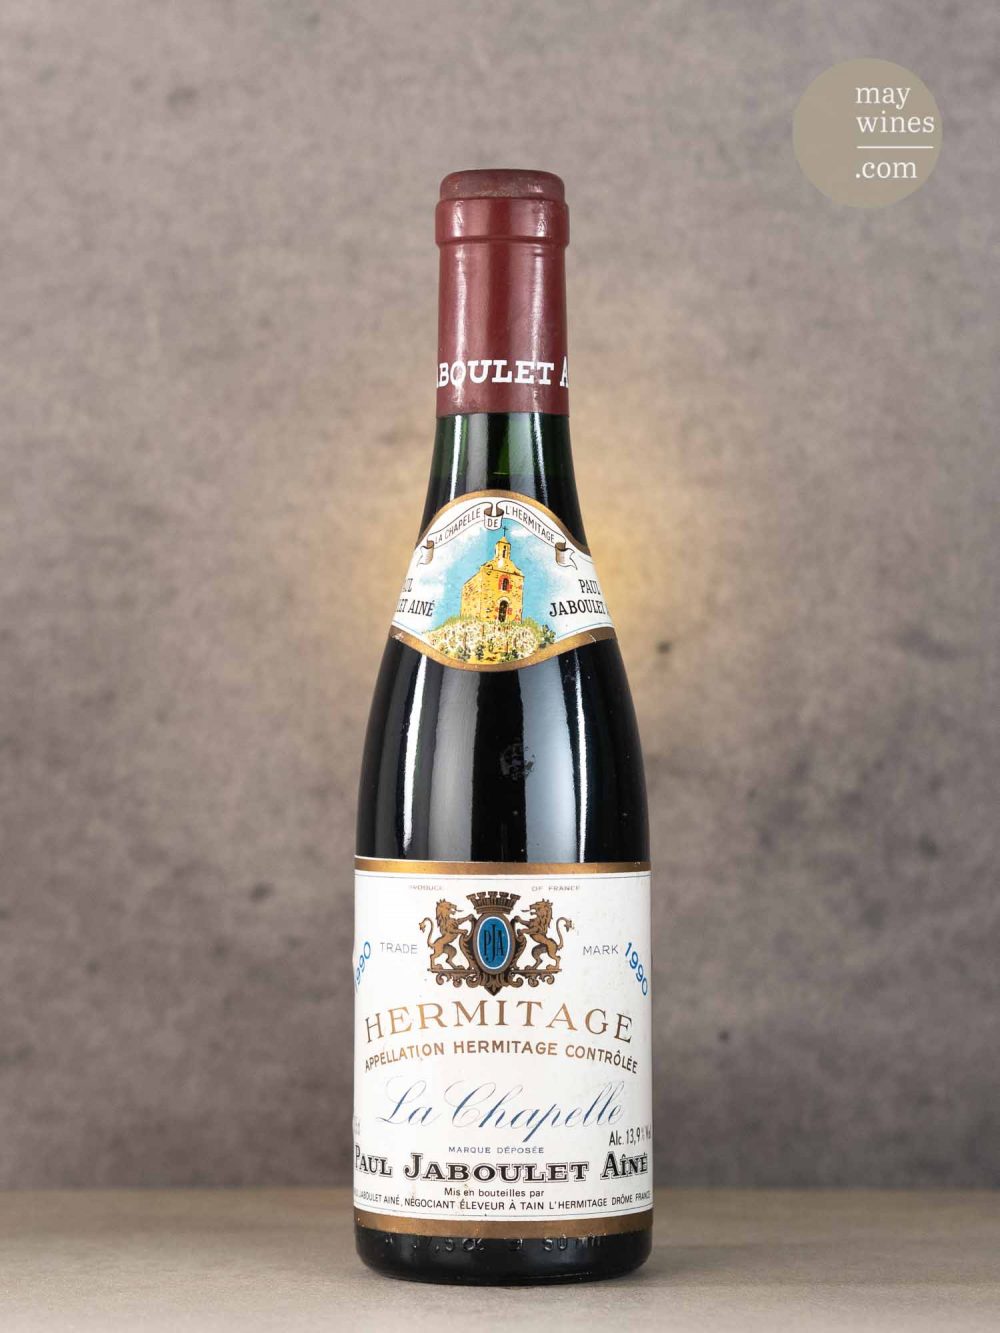 May Wines – Rotwein – 1990 Hermitage La Chapelle - Domaine Paul Jaboulet Aine